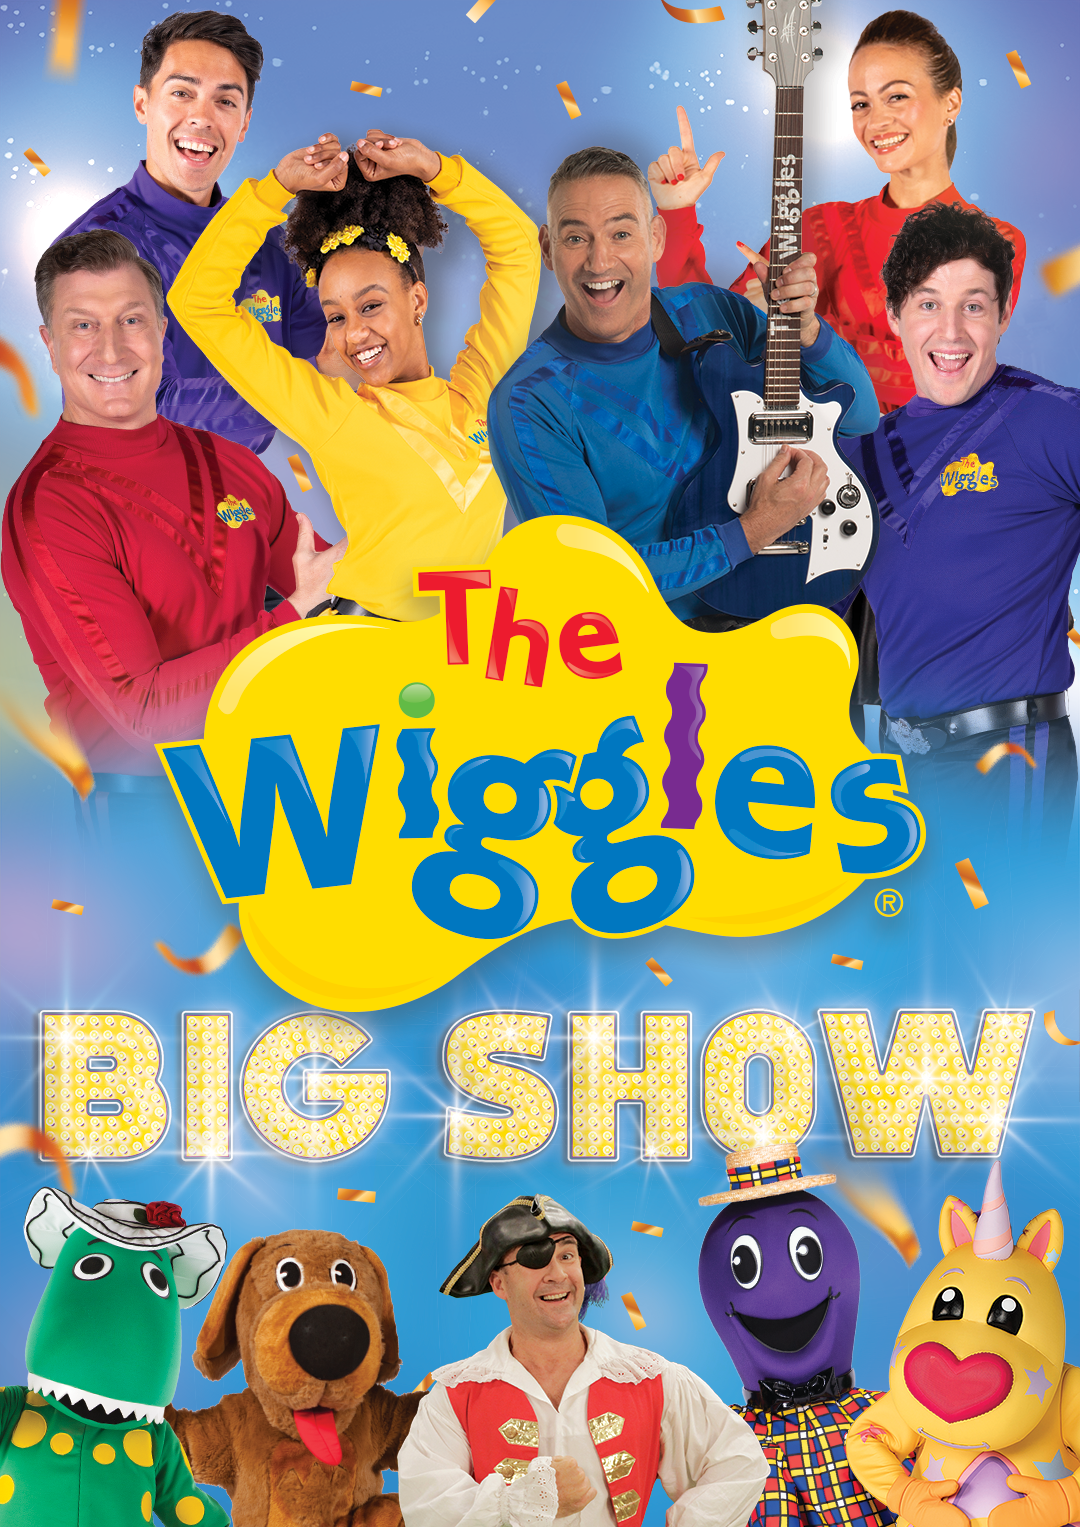 https://static.wikia.nocookie.net/wiggles/images/a/aa/Wigglesnzbigshow.png/revision/latest?cb=20220606222339